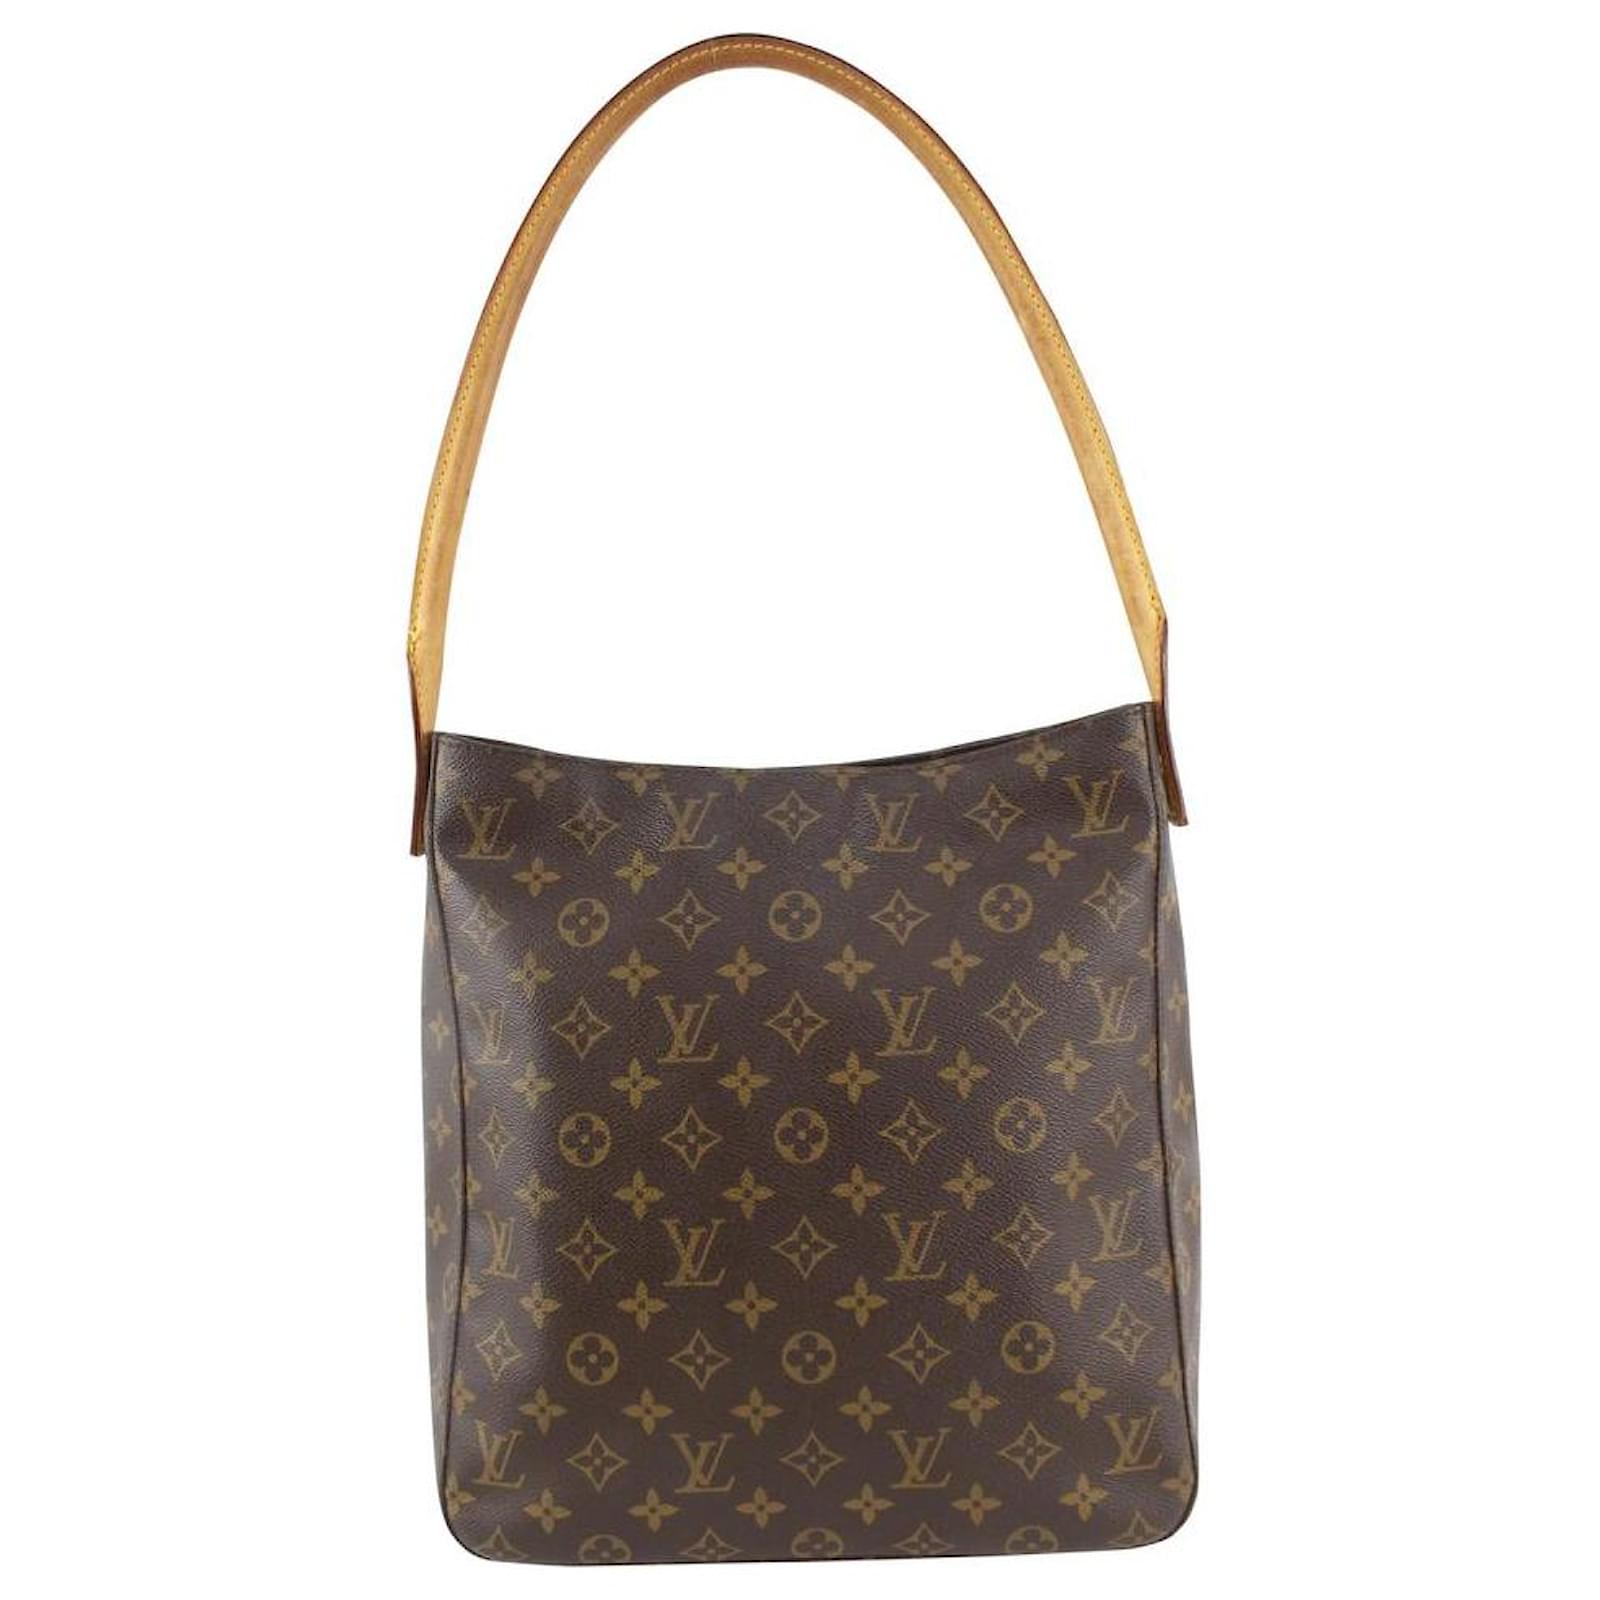 louis vuitton styles discontinued